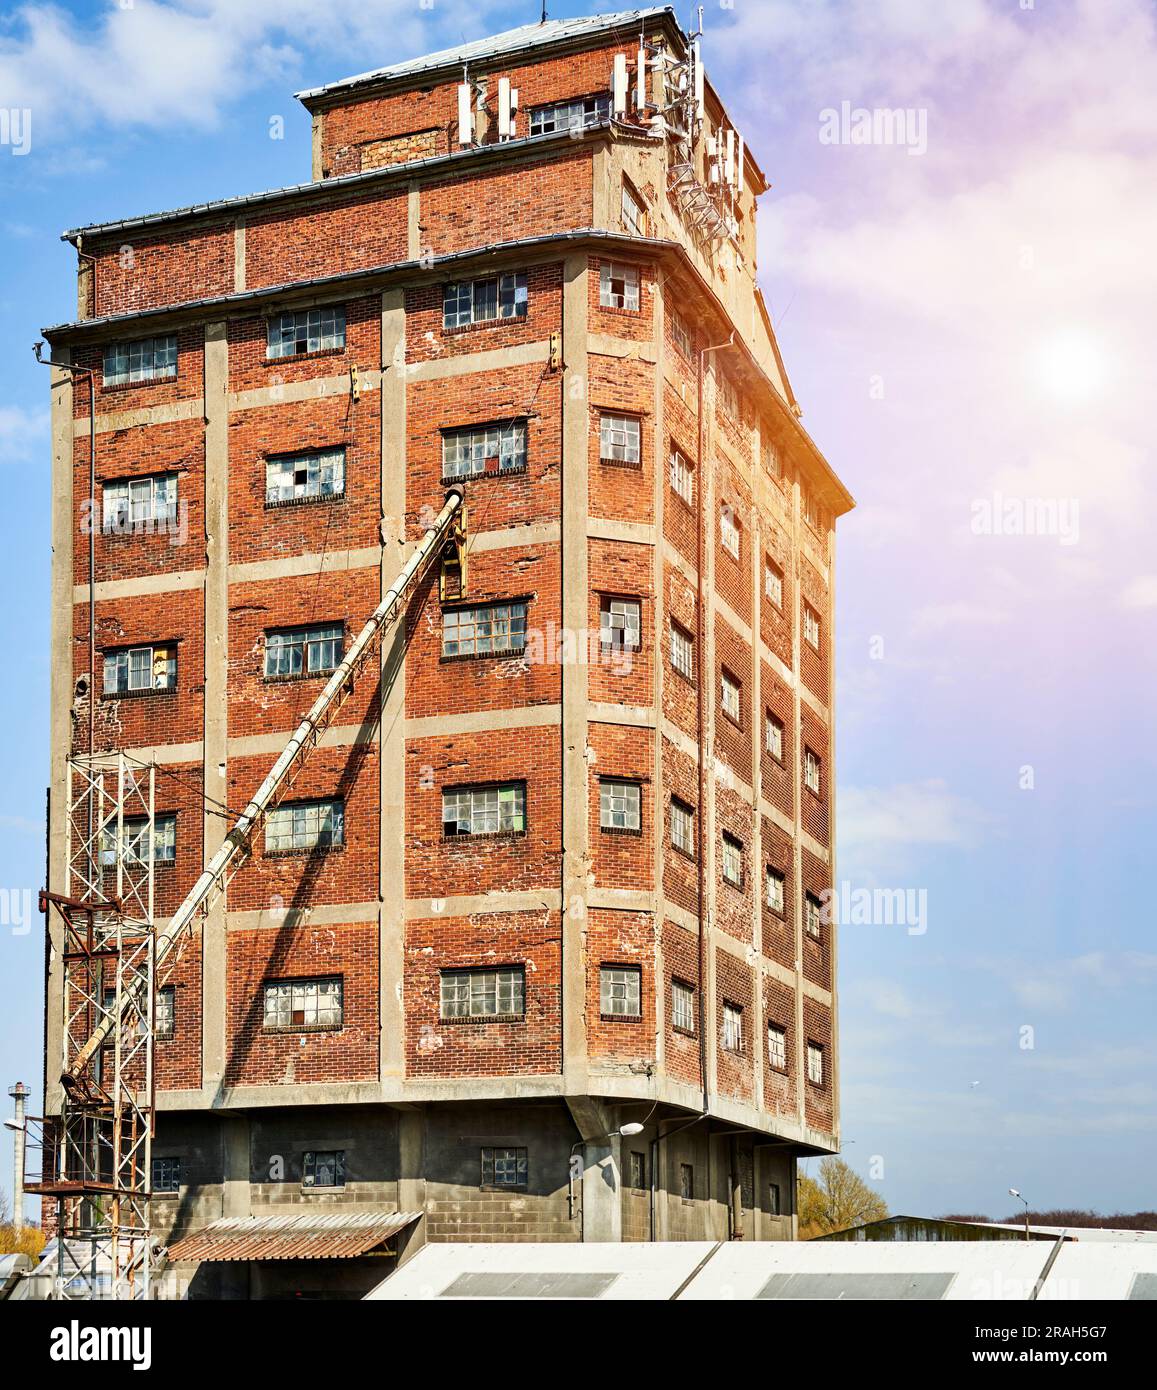 Historic red brick warehouse building in a Polish port Stock Photo